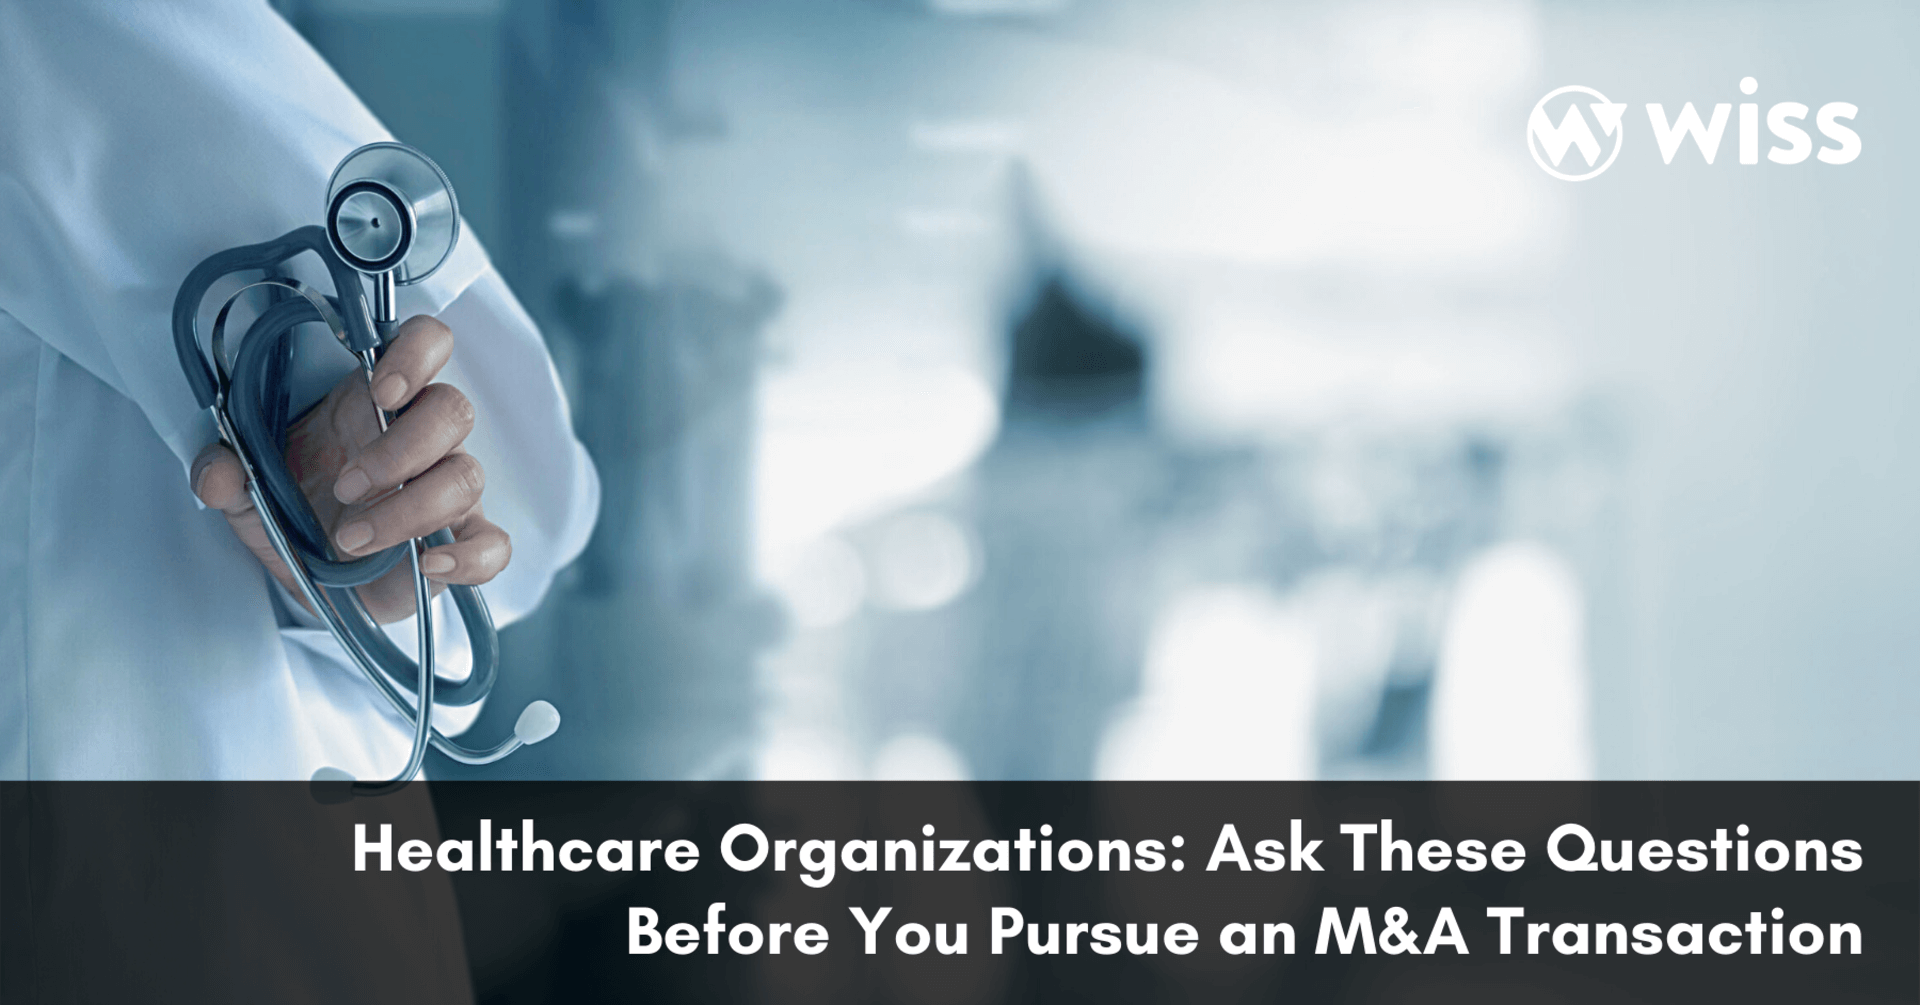 Healthcare Organizations: Ask These Questions Before You Pursue an M&A Transaction